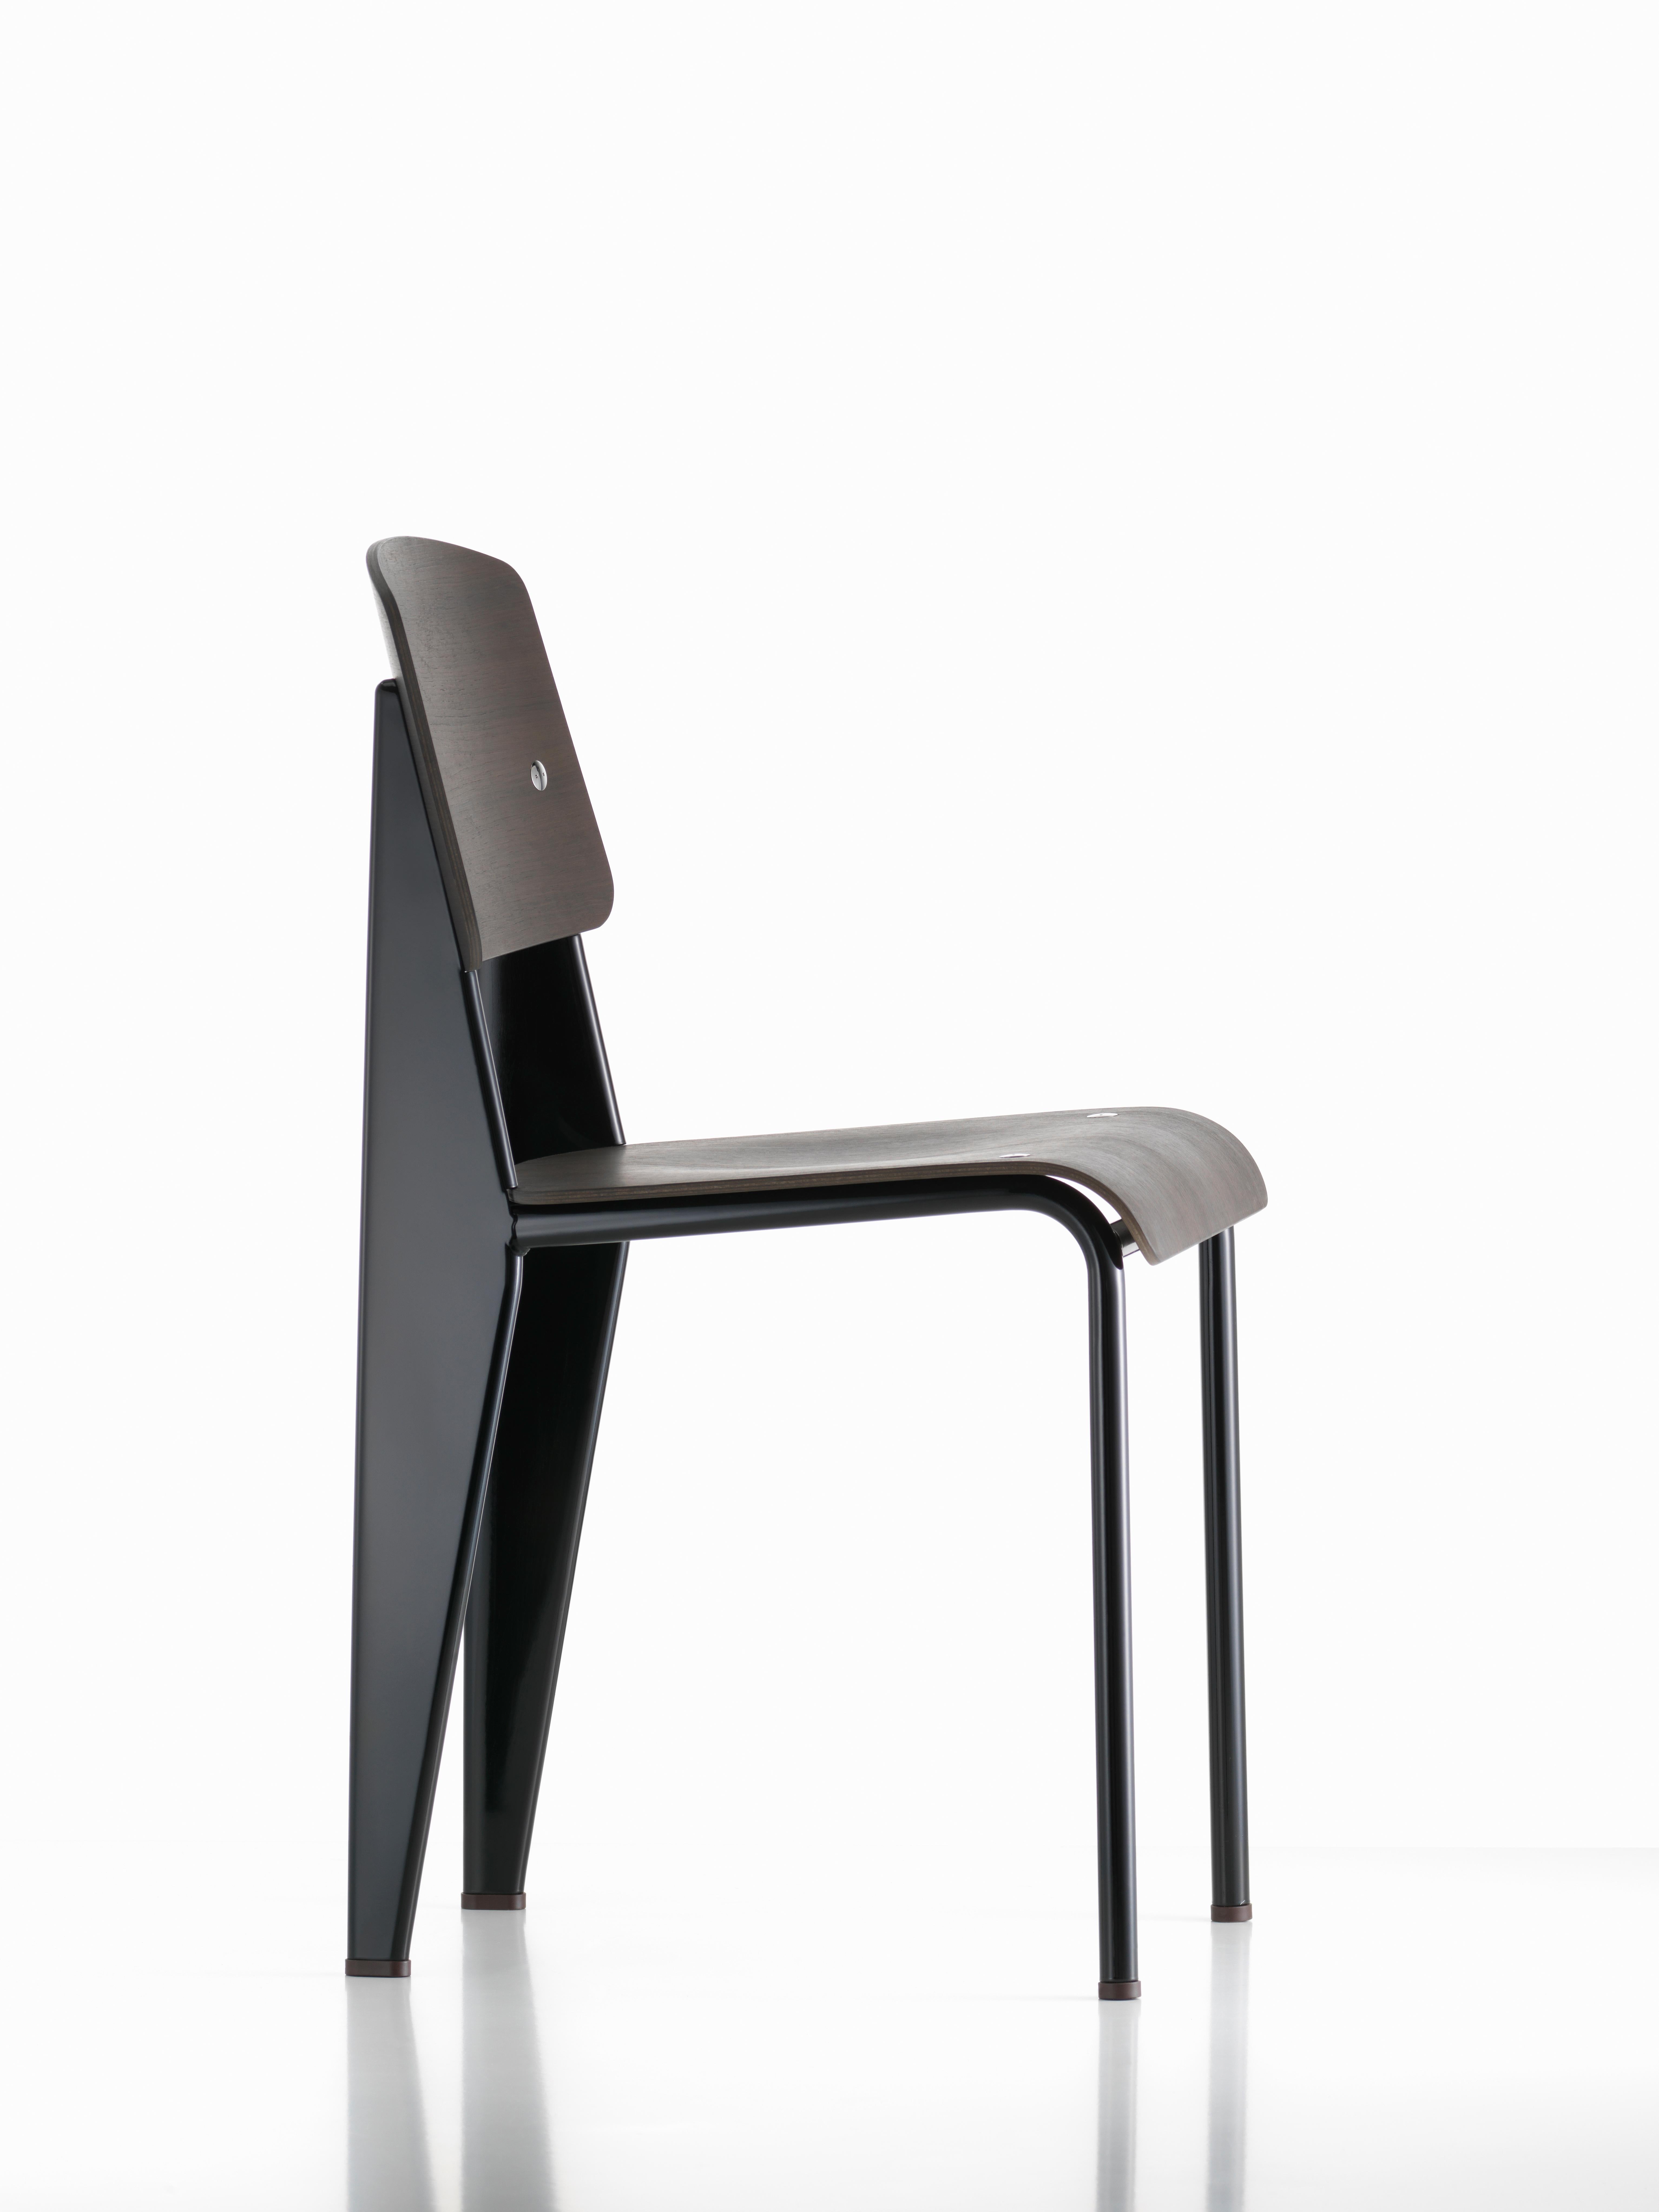 Jean Prouvé standard chair in black tinted walnut and black metal for Vitra. The standard chair is an early masterpiece by the French designer and engineer Jean Prouvé. Originally designed in 1934, the Standard evolved into one of the most famous